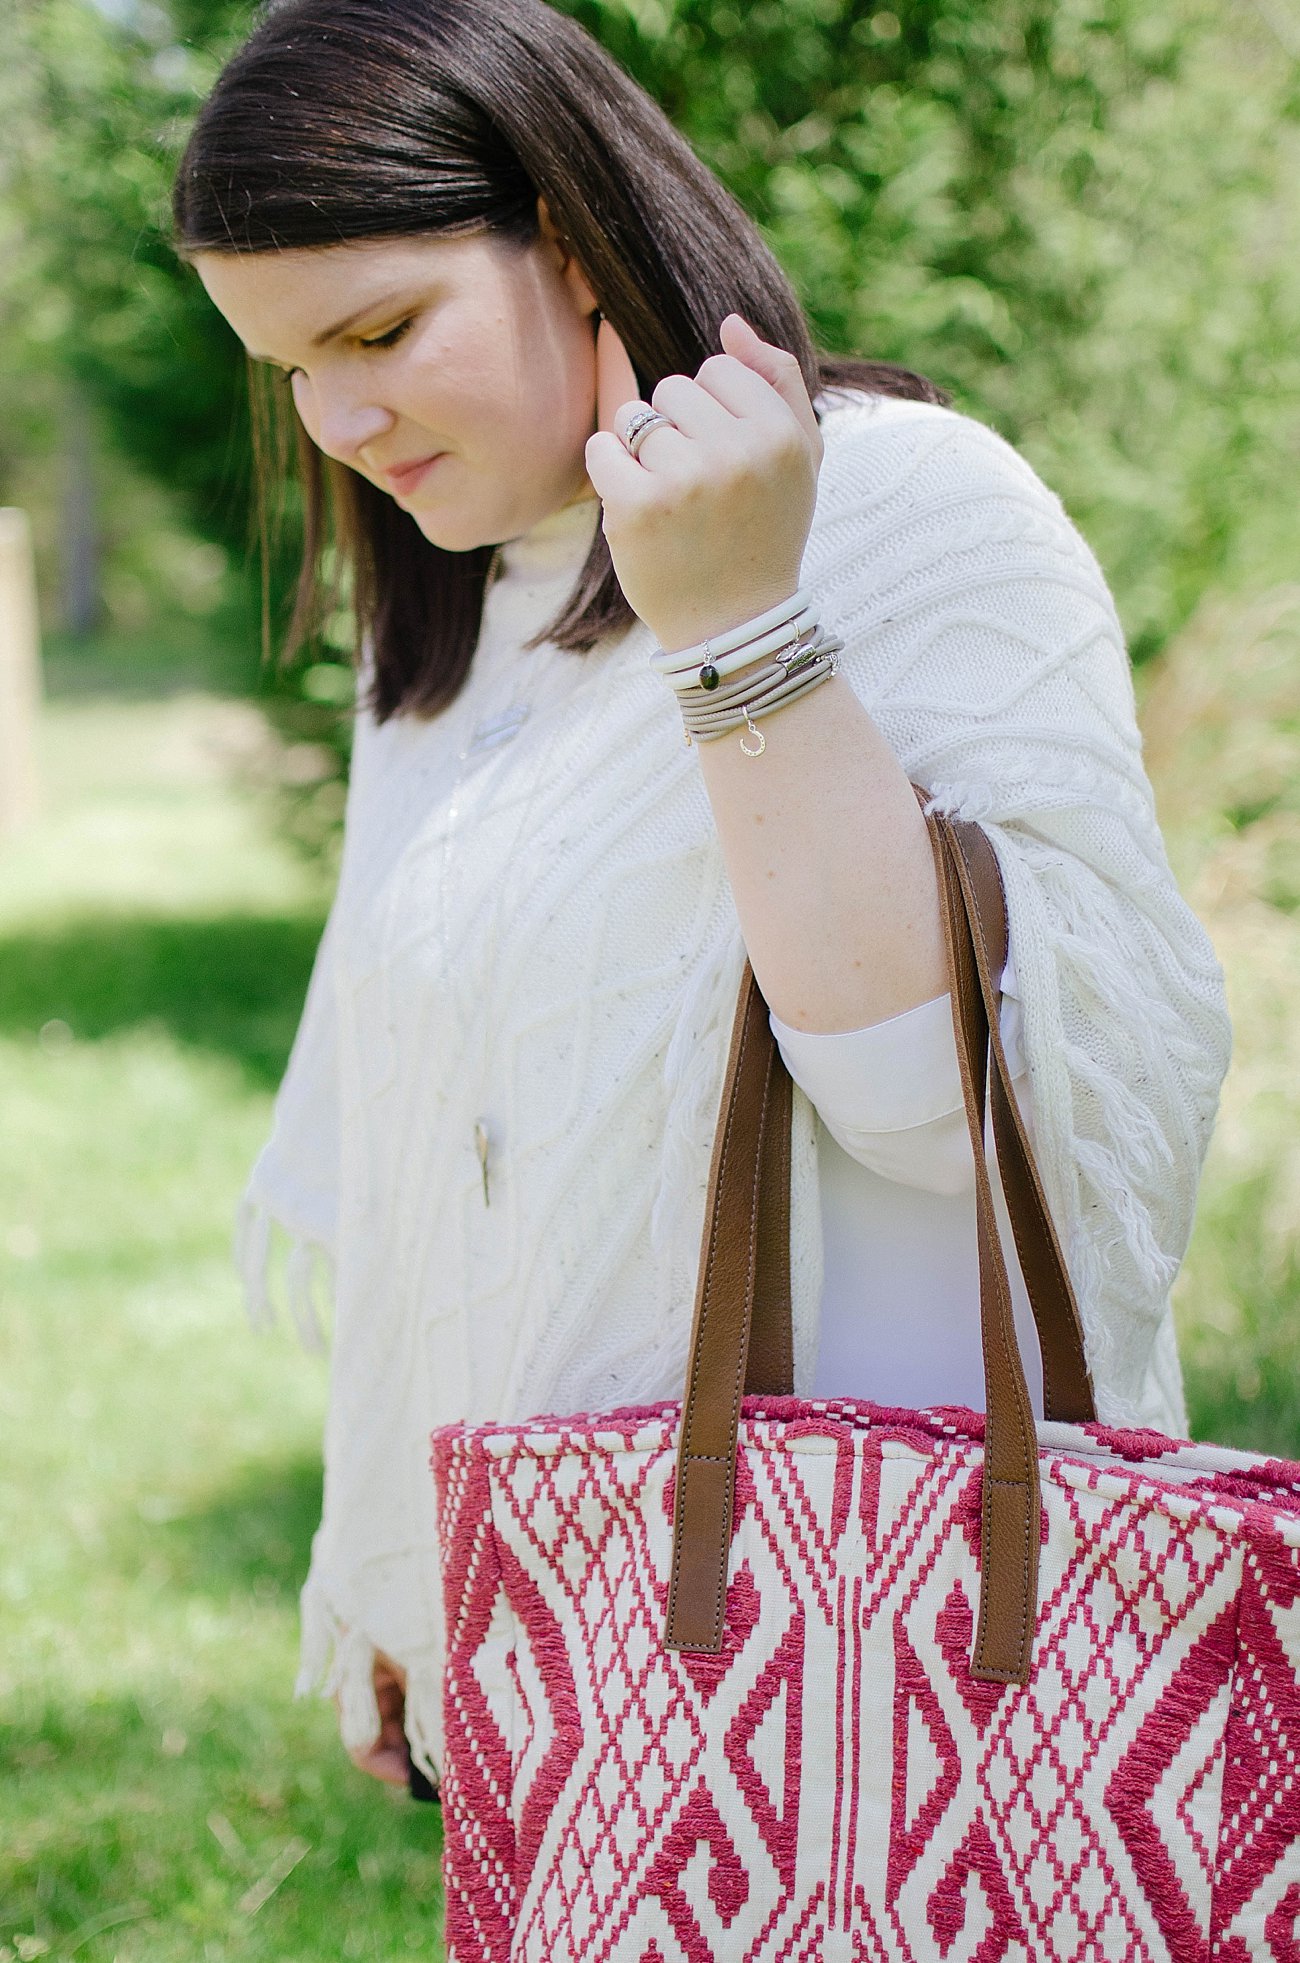 Grace & Lace poncho, Grace & Lace bag, Nickel and Suede earrings, The Root Collective Millie flats, Endless Jewelry bracelets, Wristology Watch | Casual Style - North Carolina Fashion Blogger (6)